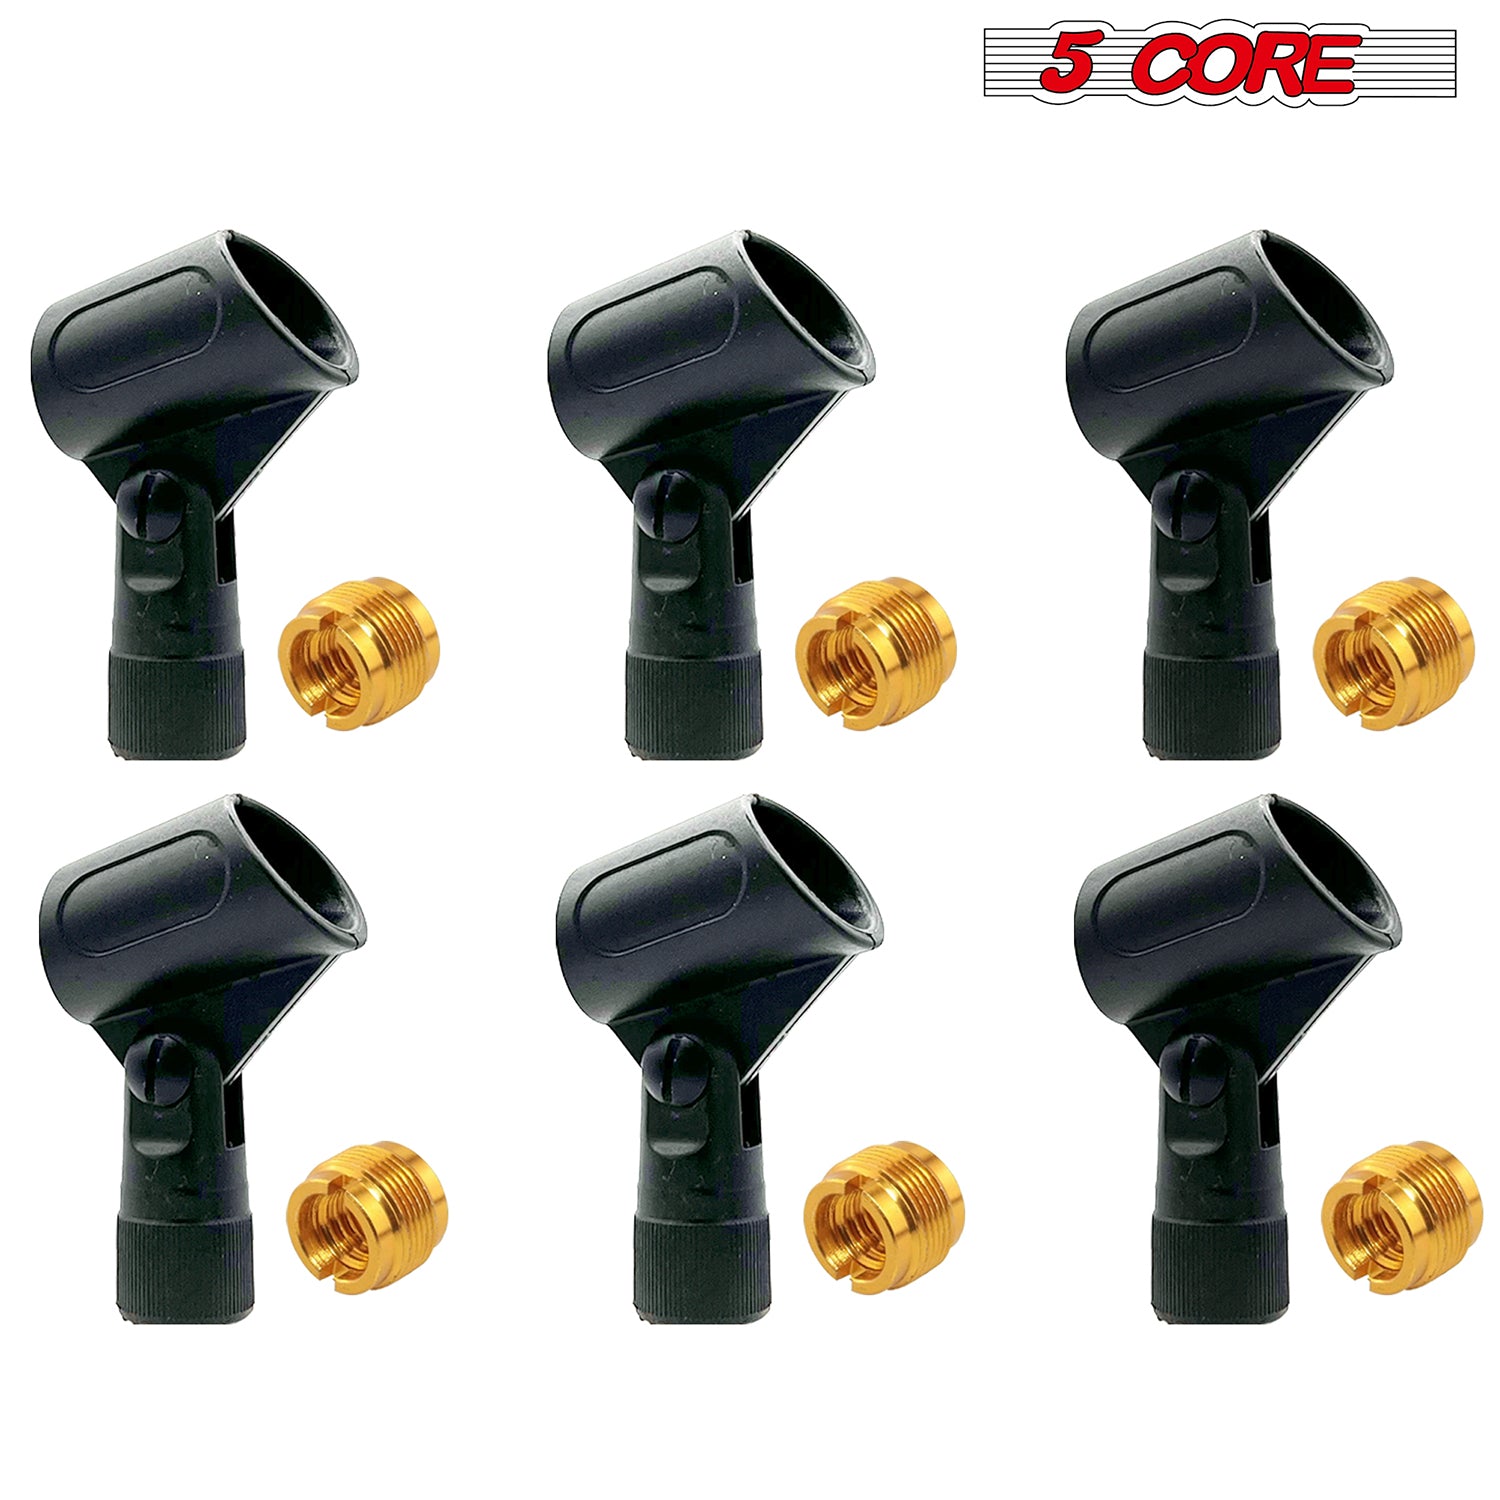 5 Core Microphone Clip Holder 6 Pieces with Screw Adapters 5/8 to 3/8 Inch